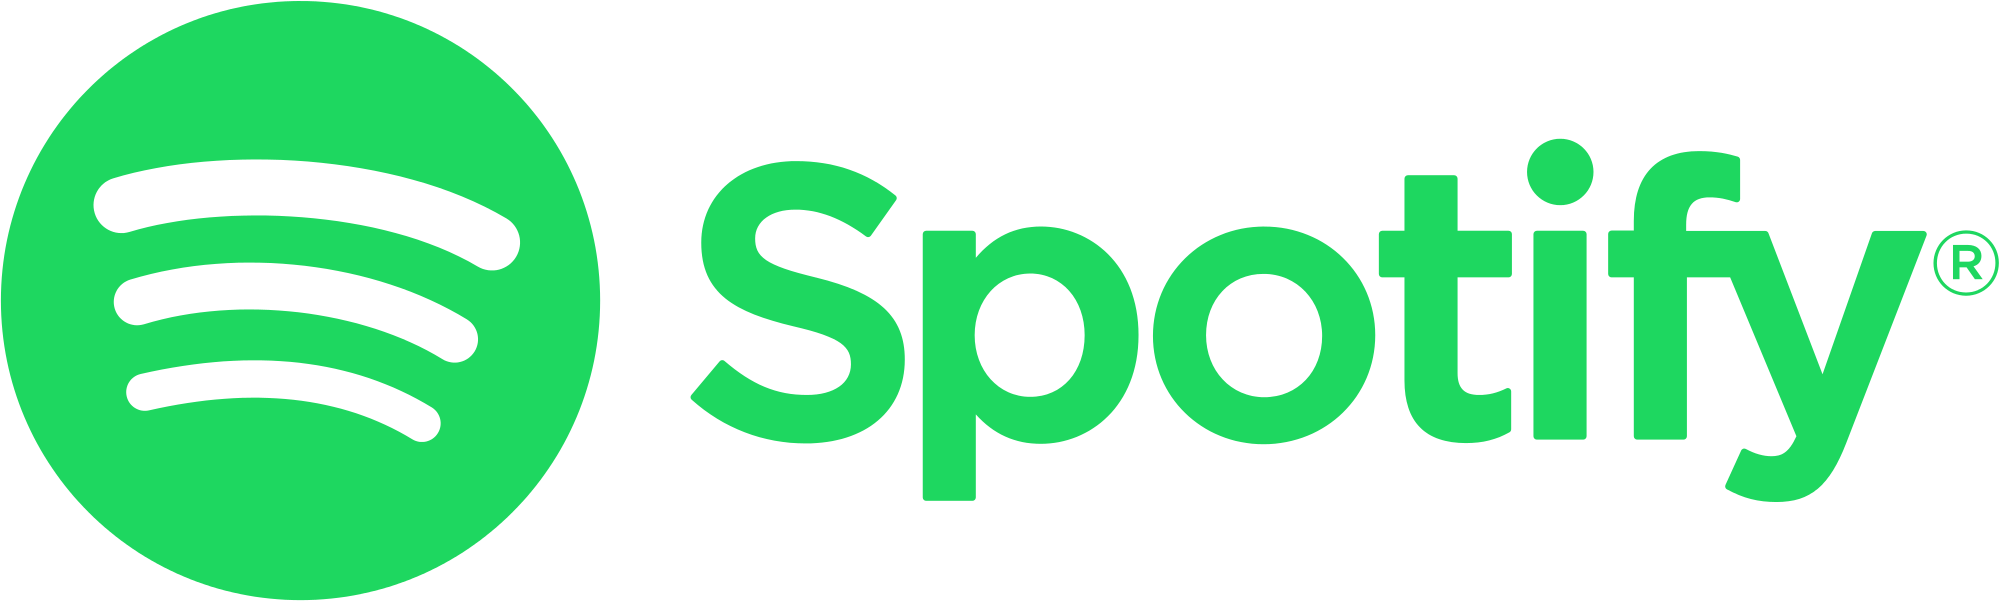 2000px-Spotify_logo_with_text.svg.png